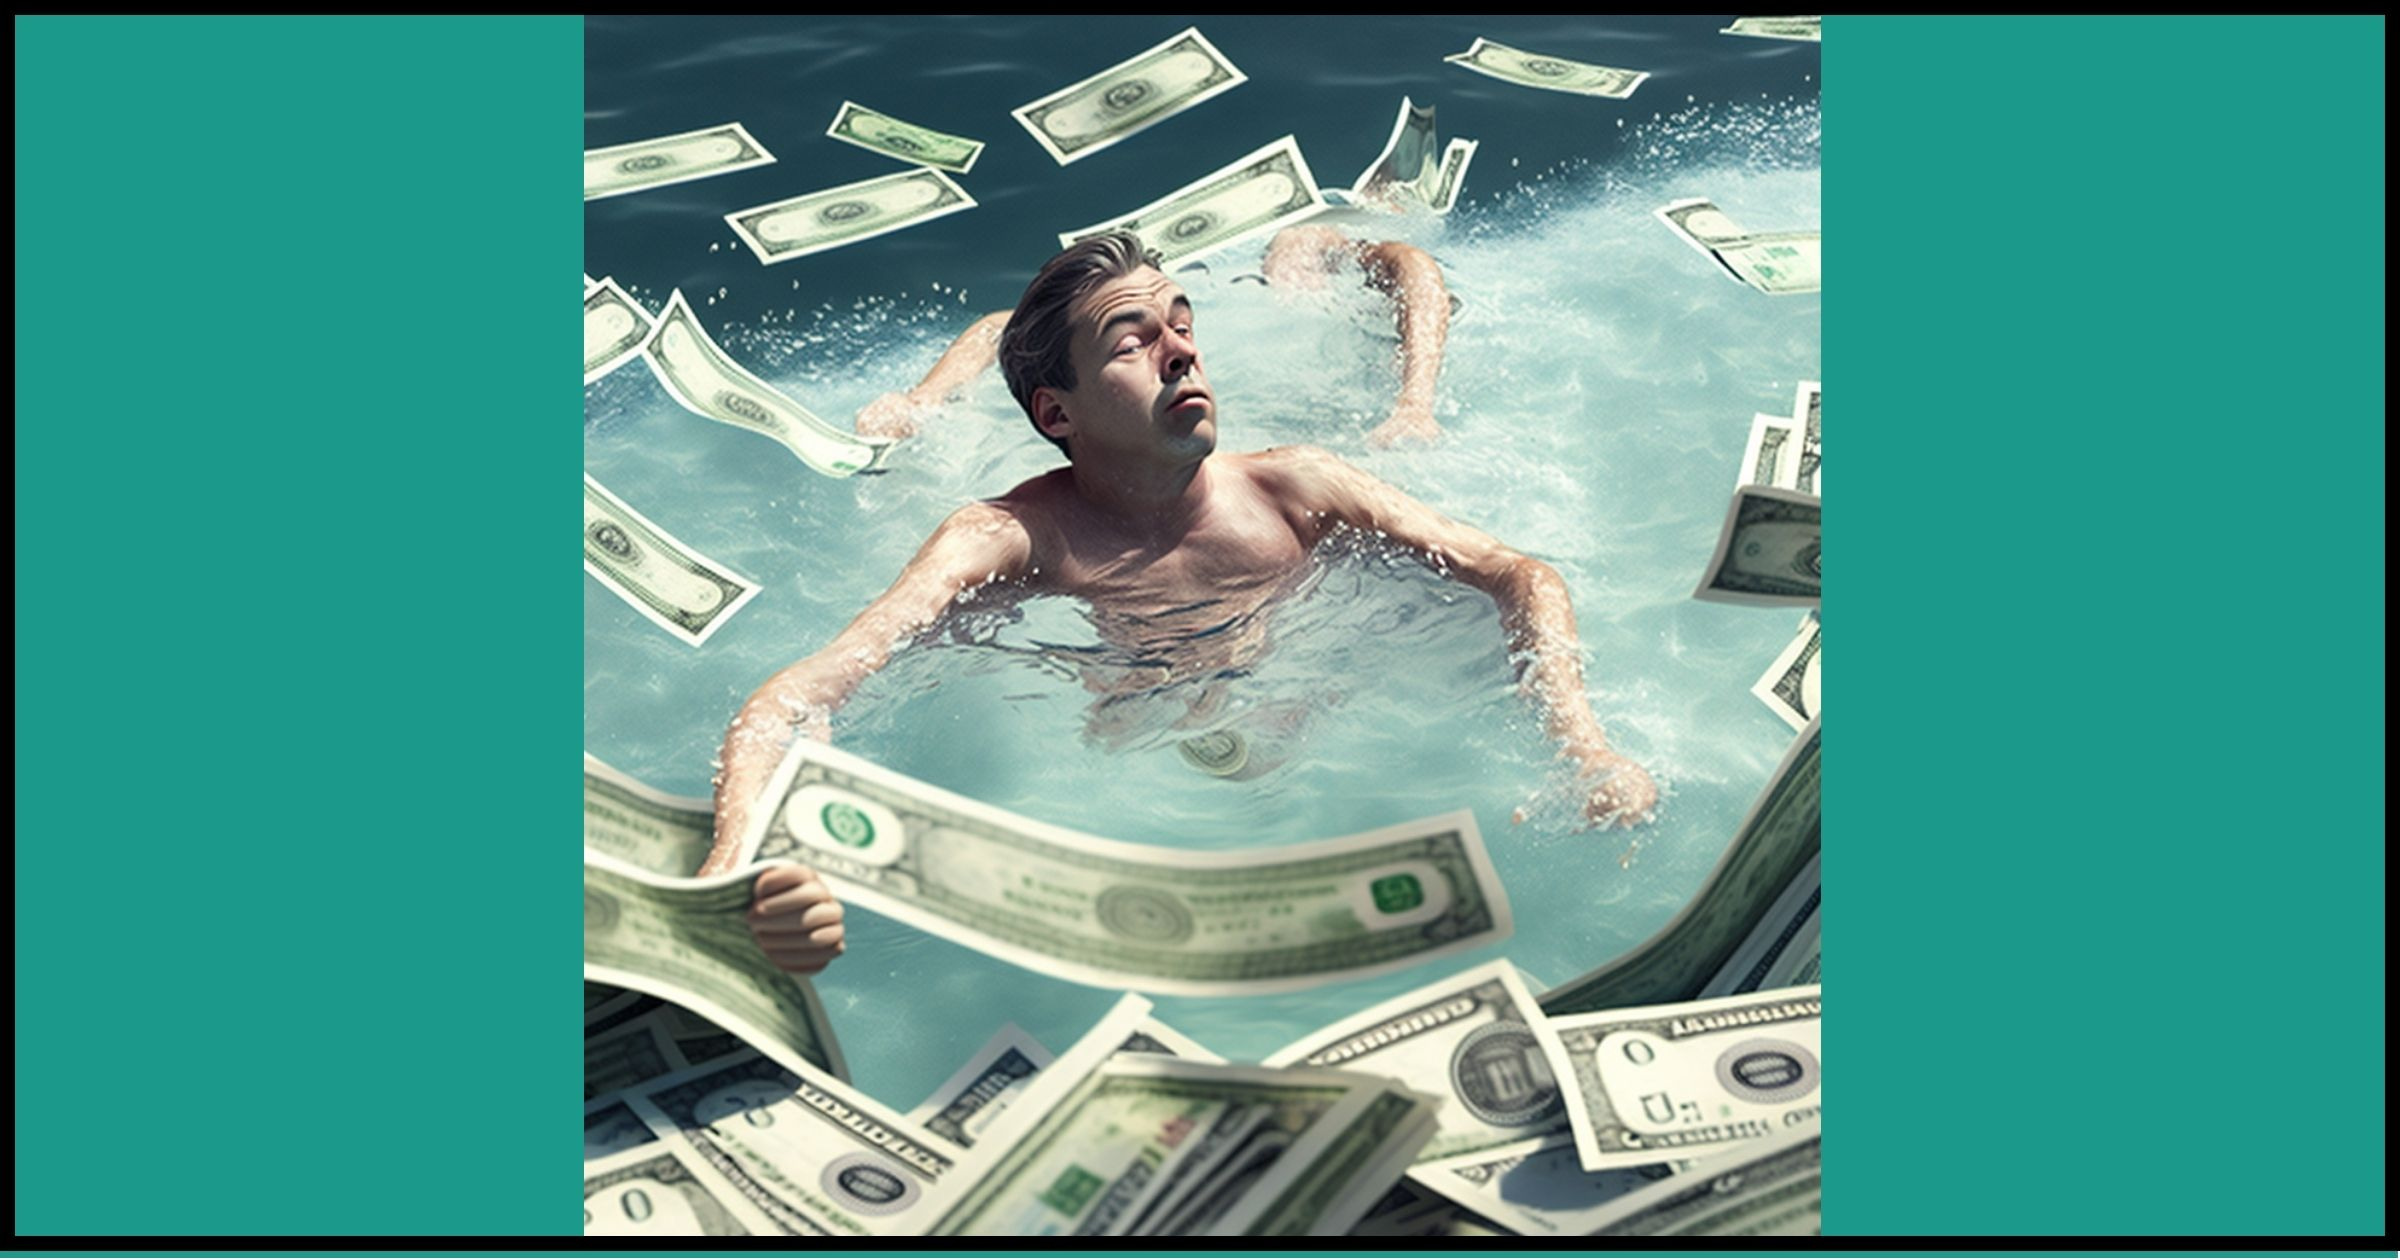 Midjourney AI: A person swimming in an outdoor swimming pool full of money.